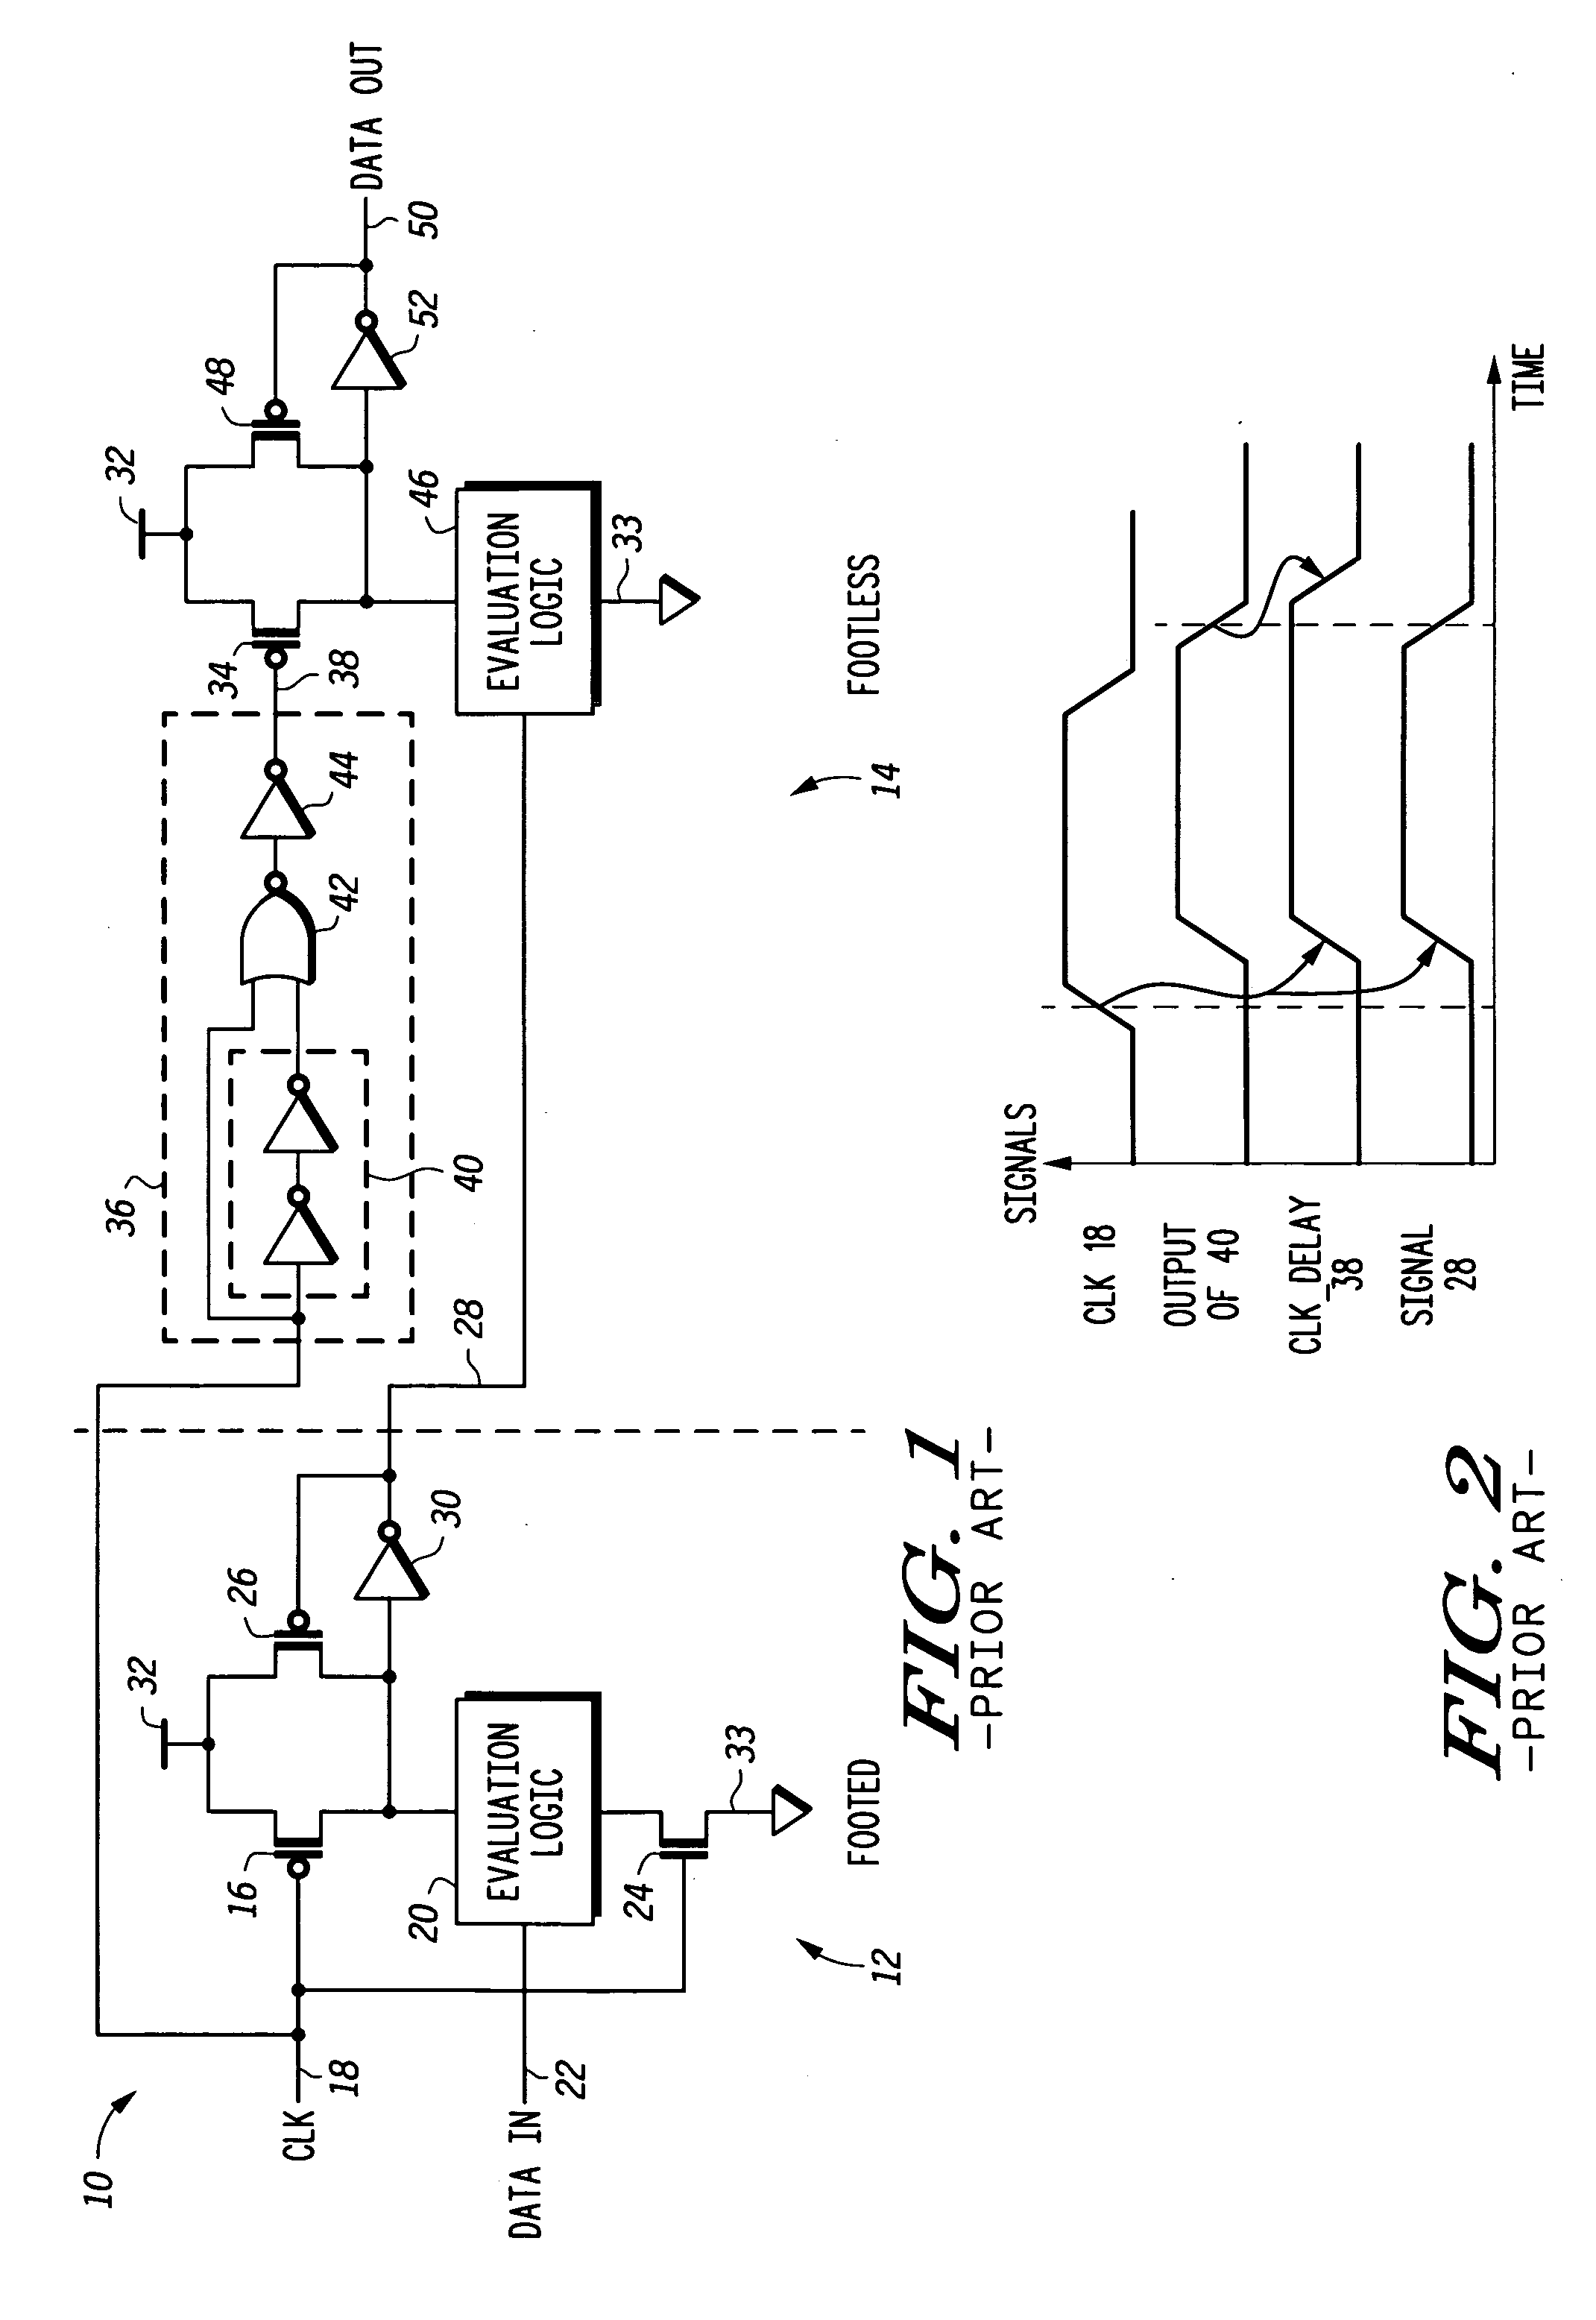 Multistage dynamic domino circuit with internally generated delay reset clock